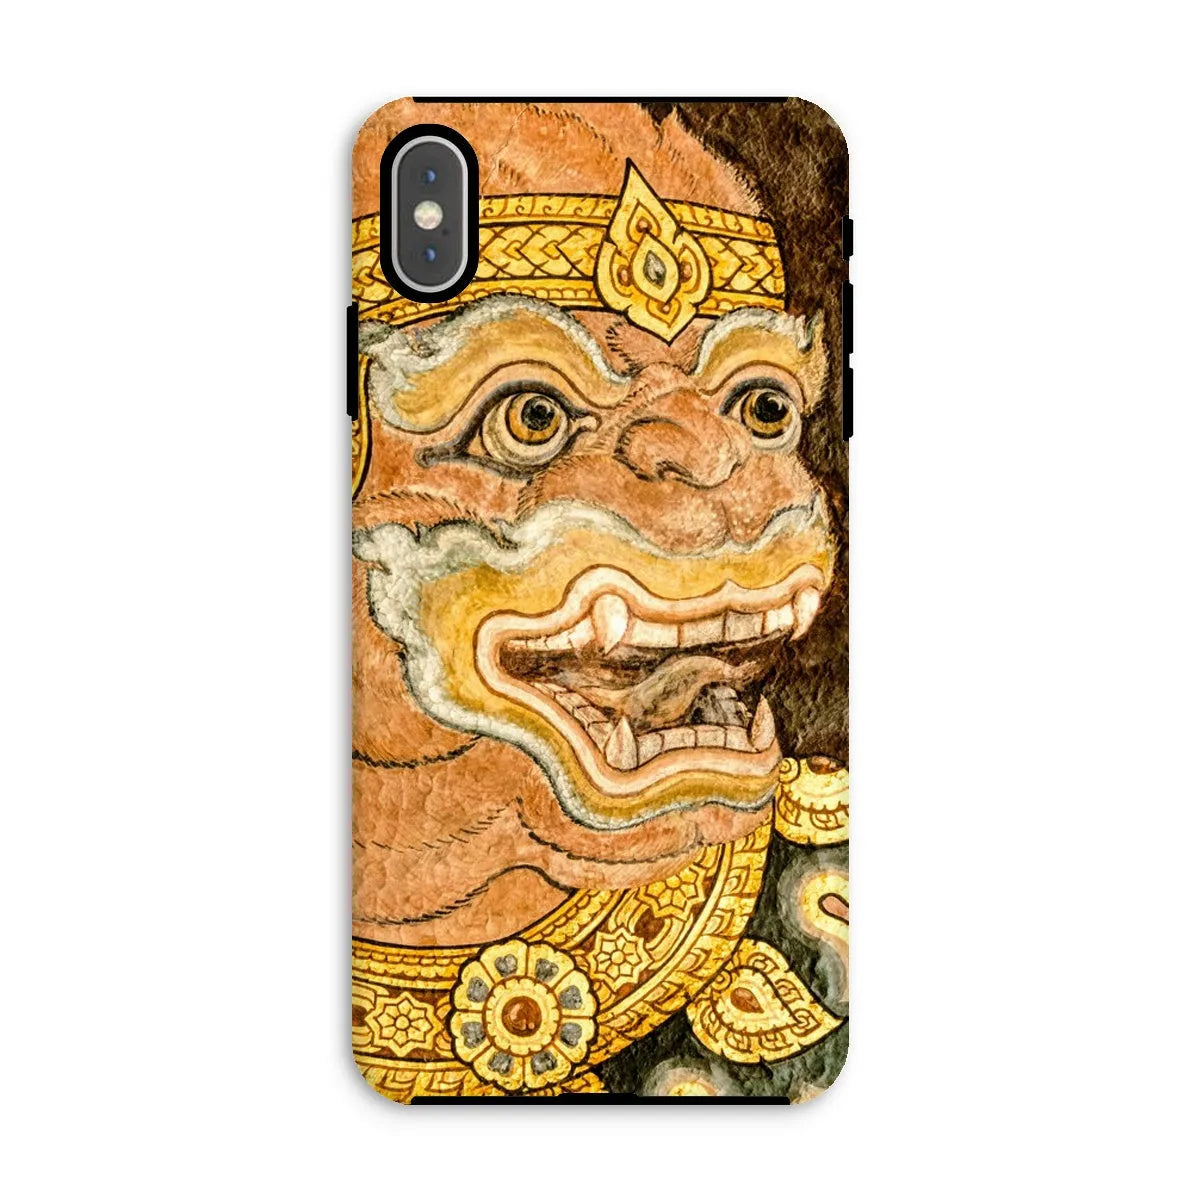 Monkey See - Traditional Thai Aesthetic Art Phone Case - Iphone Xs Max / Matte - Mobile Phone Cases - Aesthetic Art